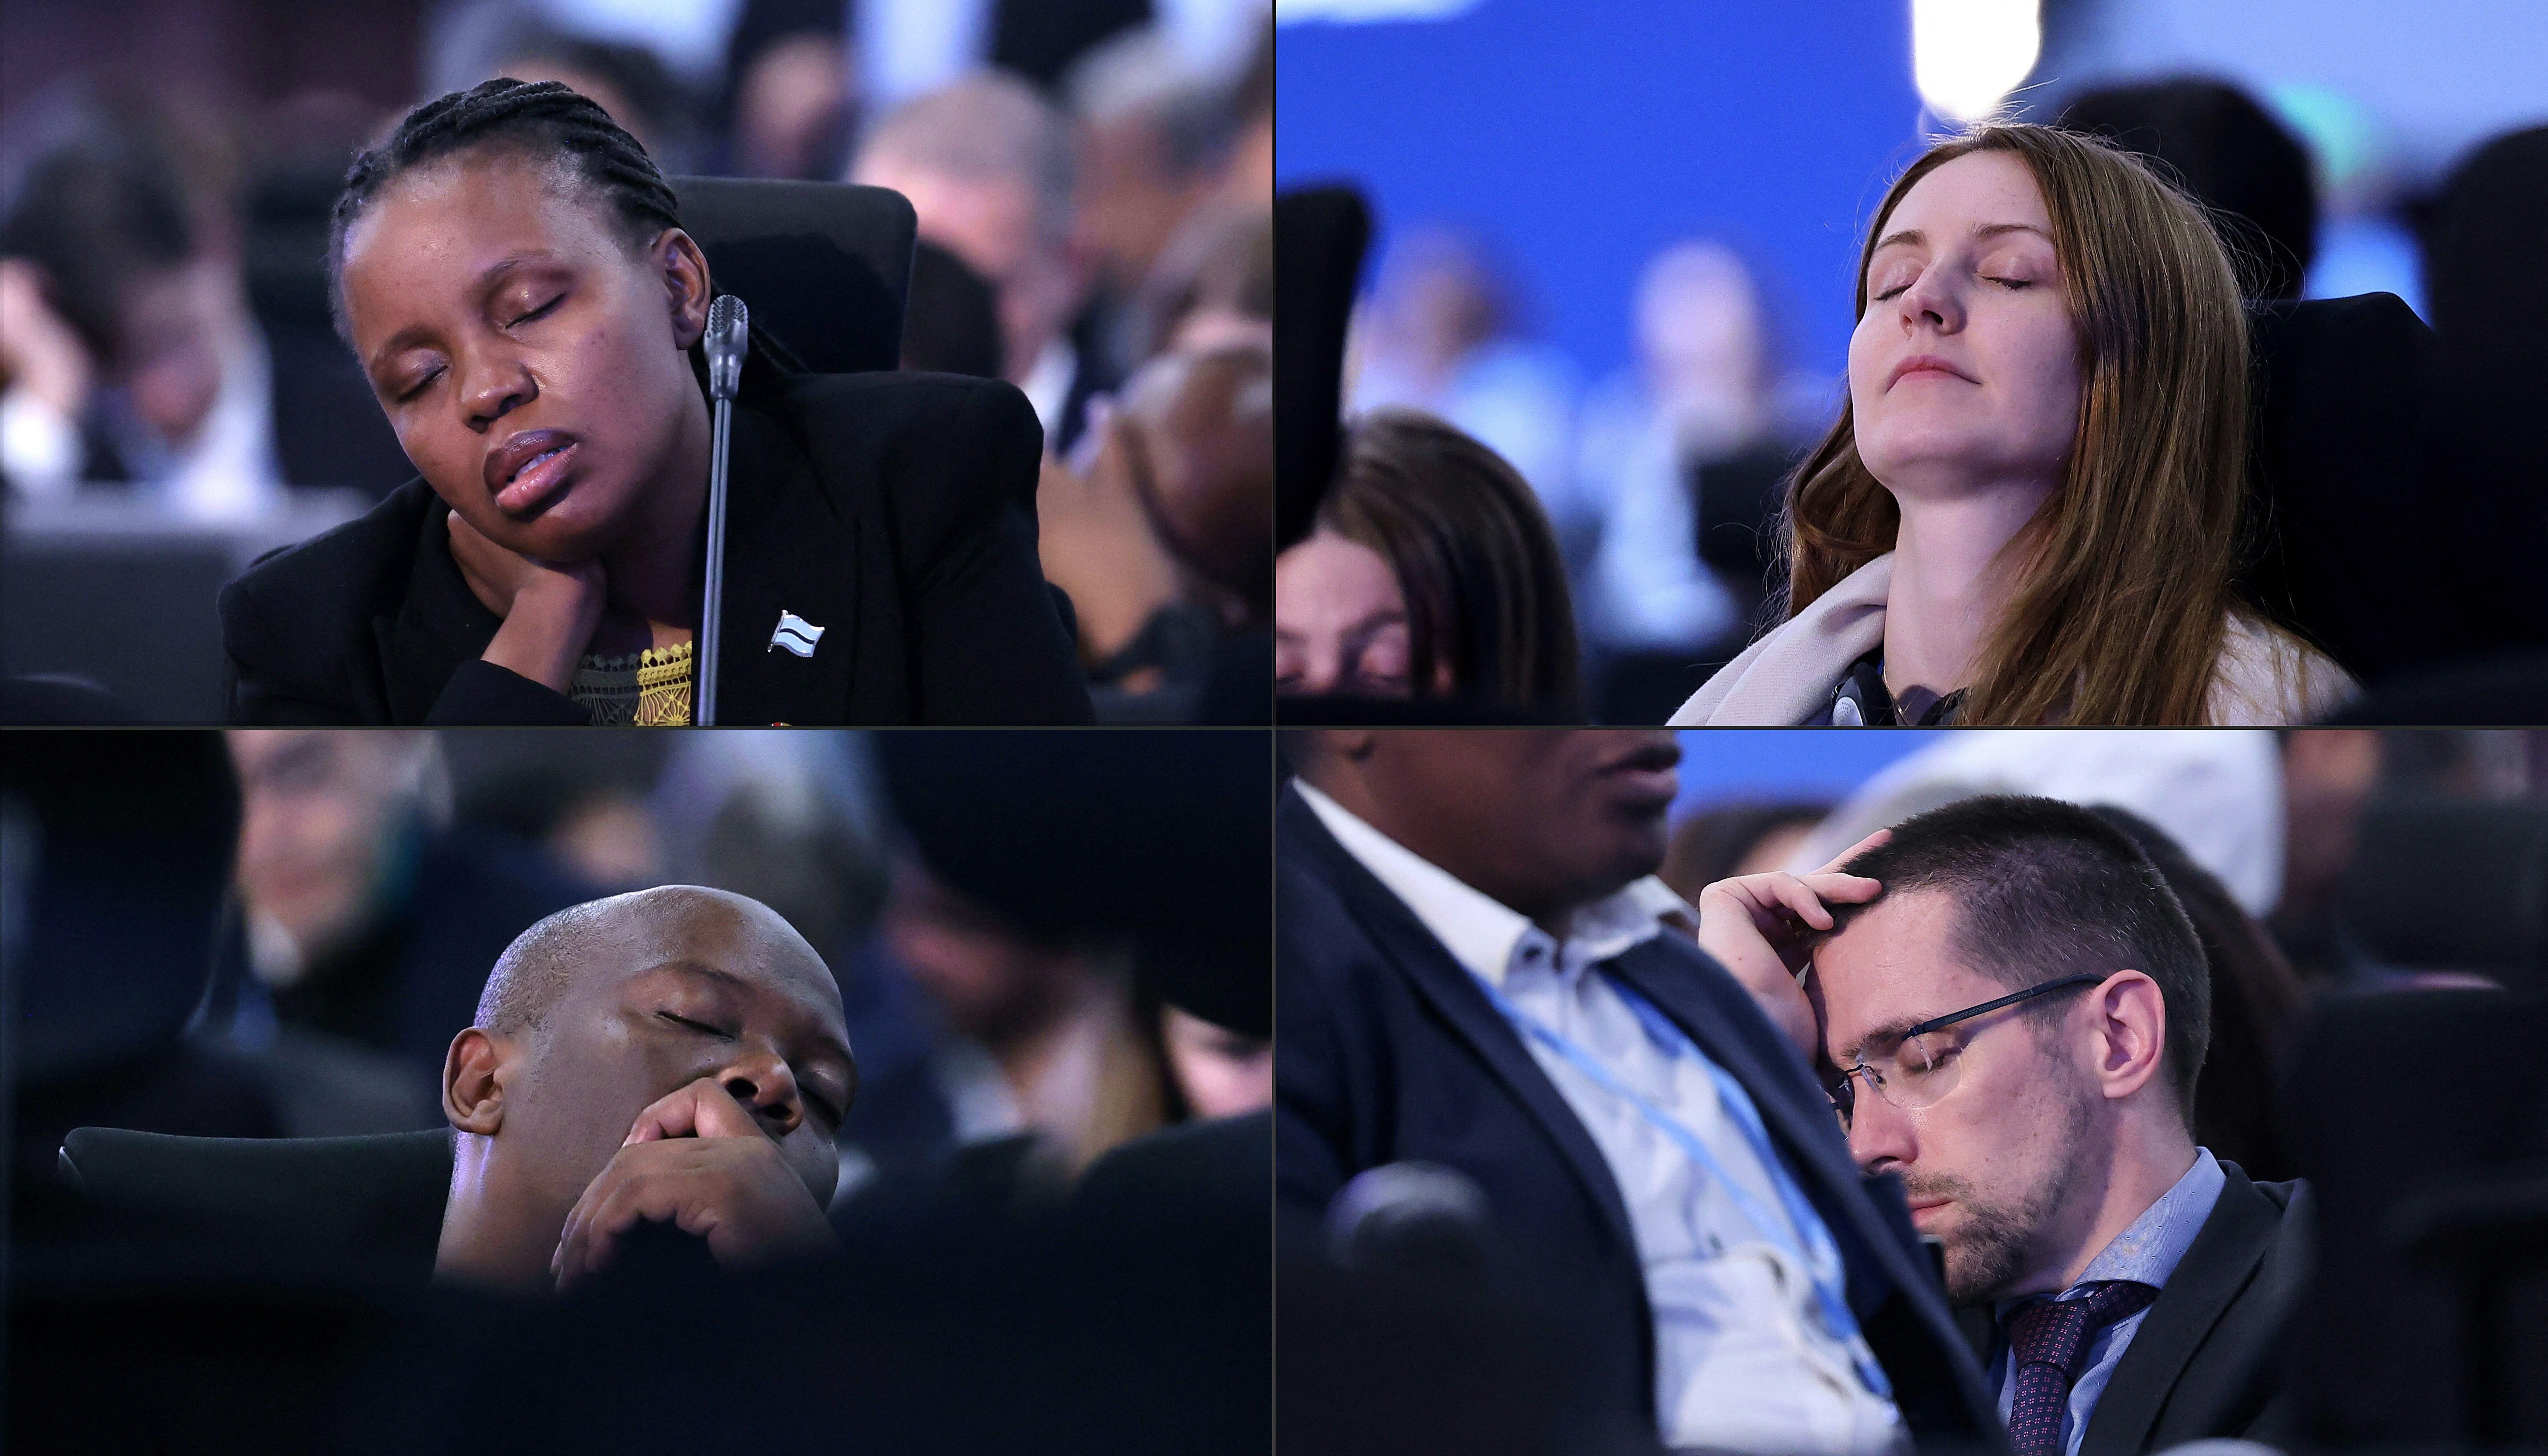 This combination of photos shows participants snoozing during the closing session of the COP27 climate conference in Sharm El-Sheikh on November 20, 2022.